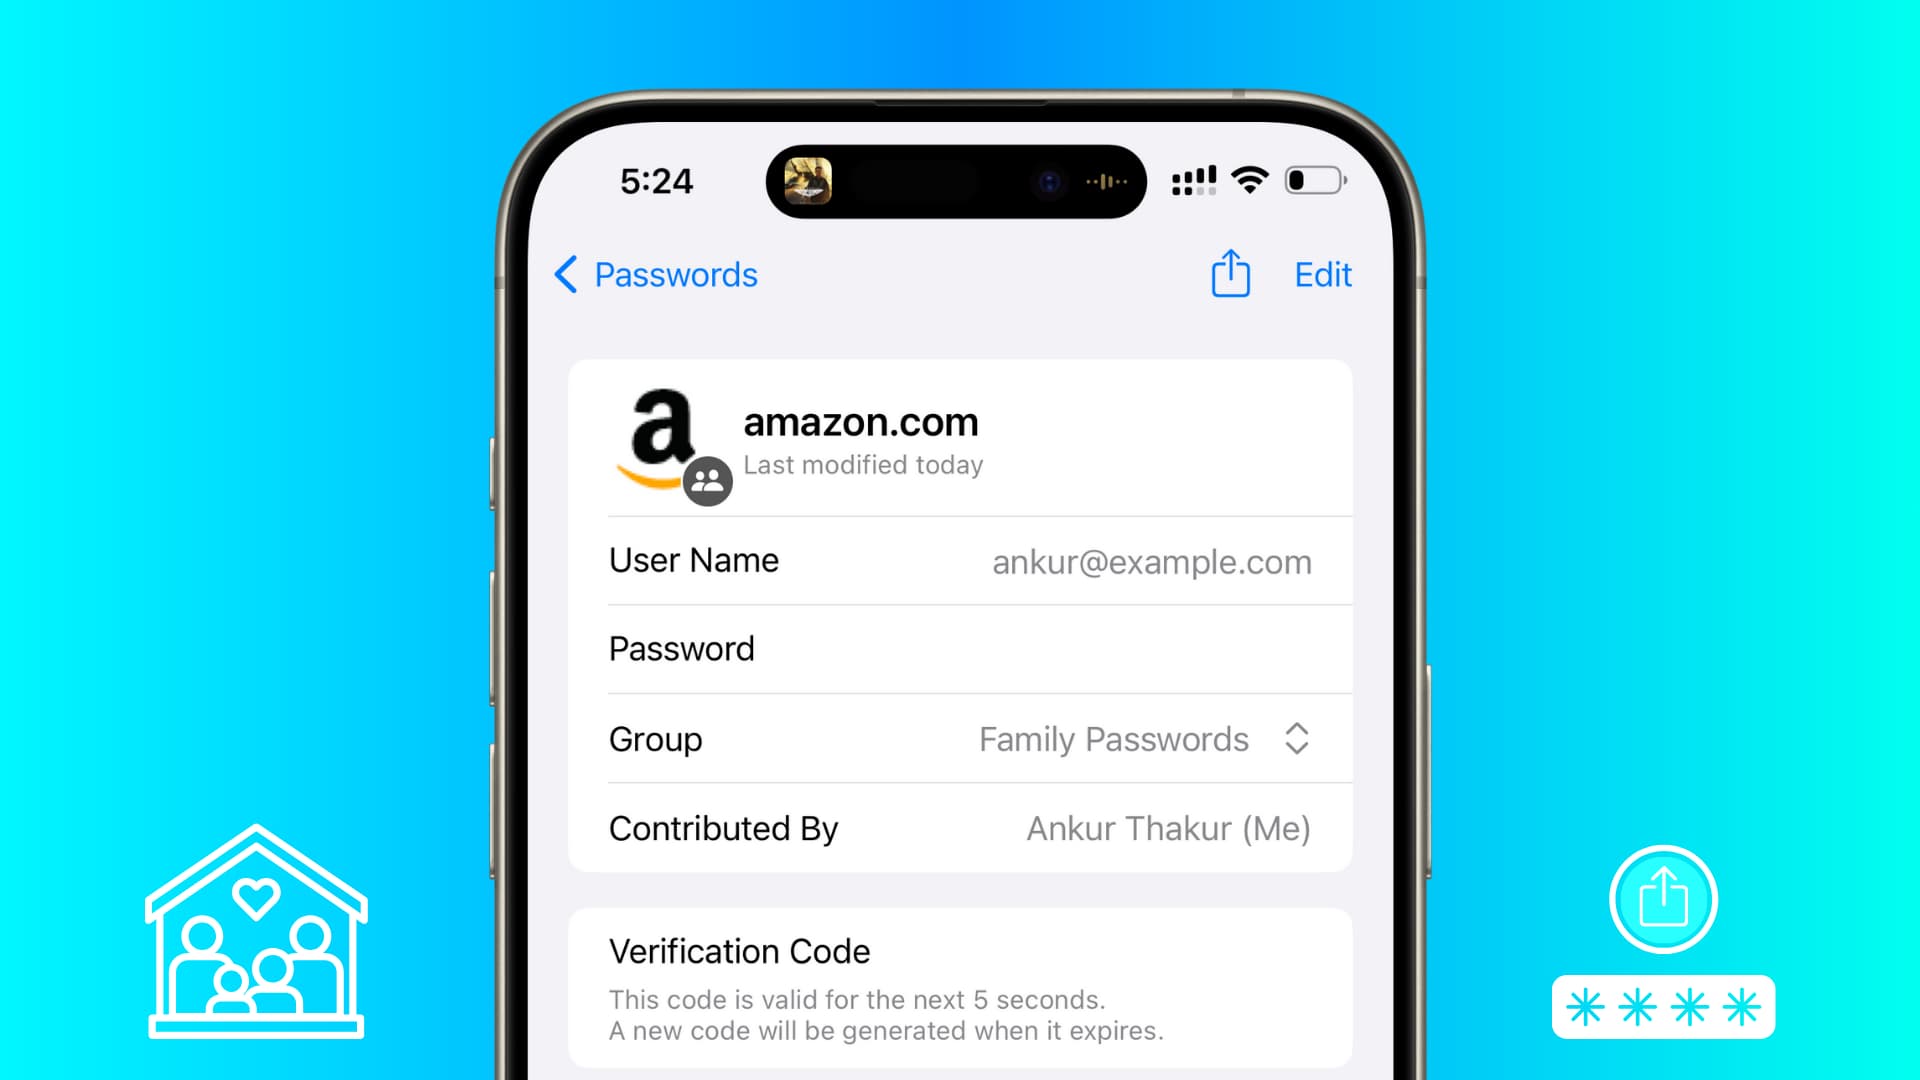 Share iCloud Keychain password with Family members from your iPhone